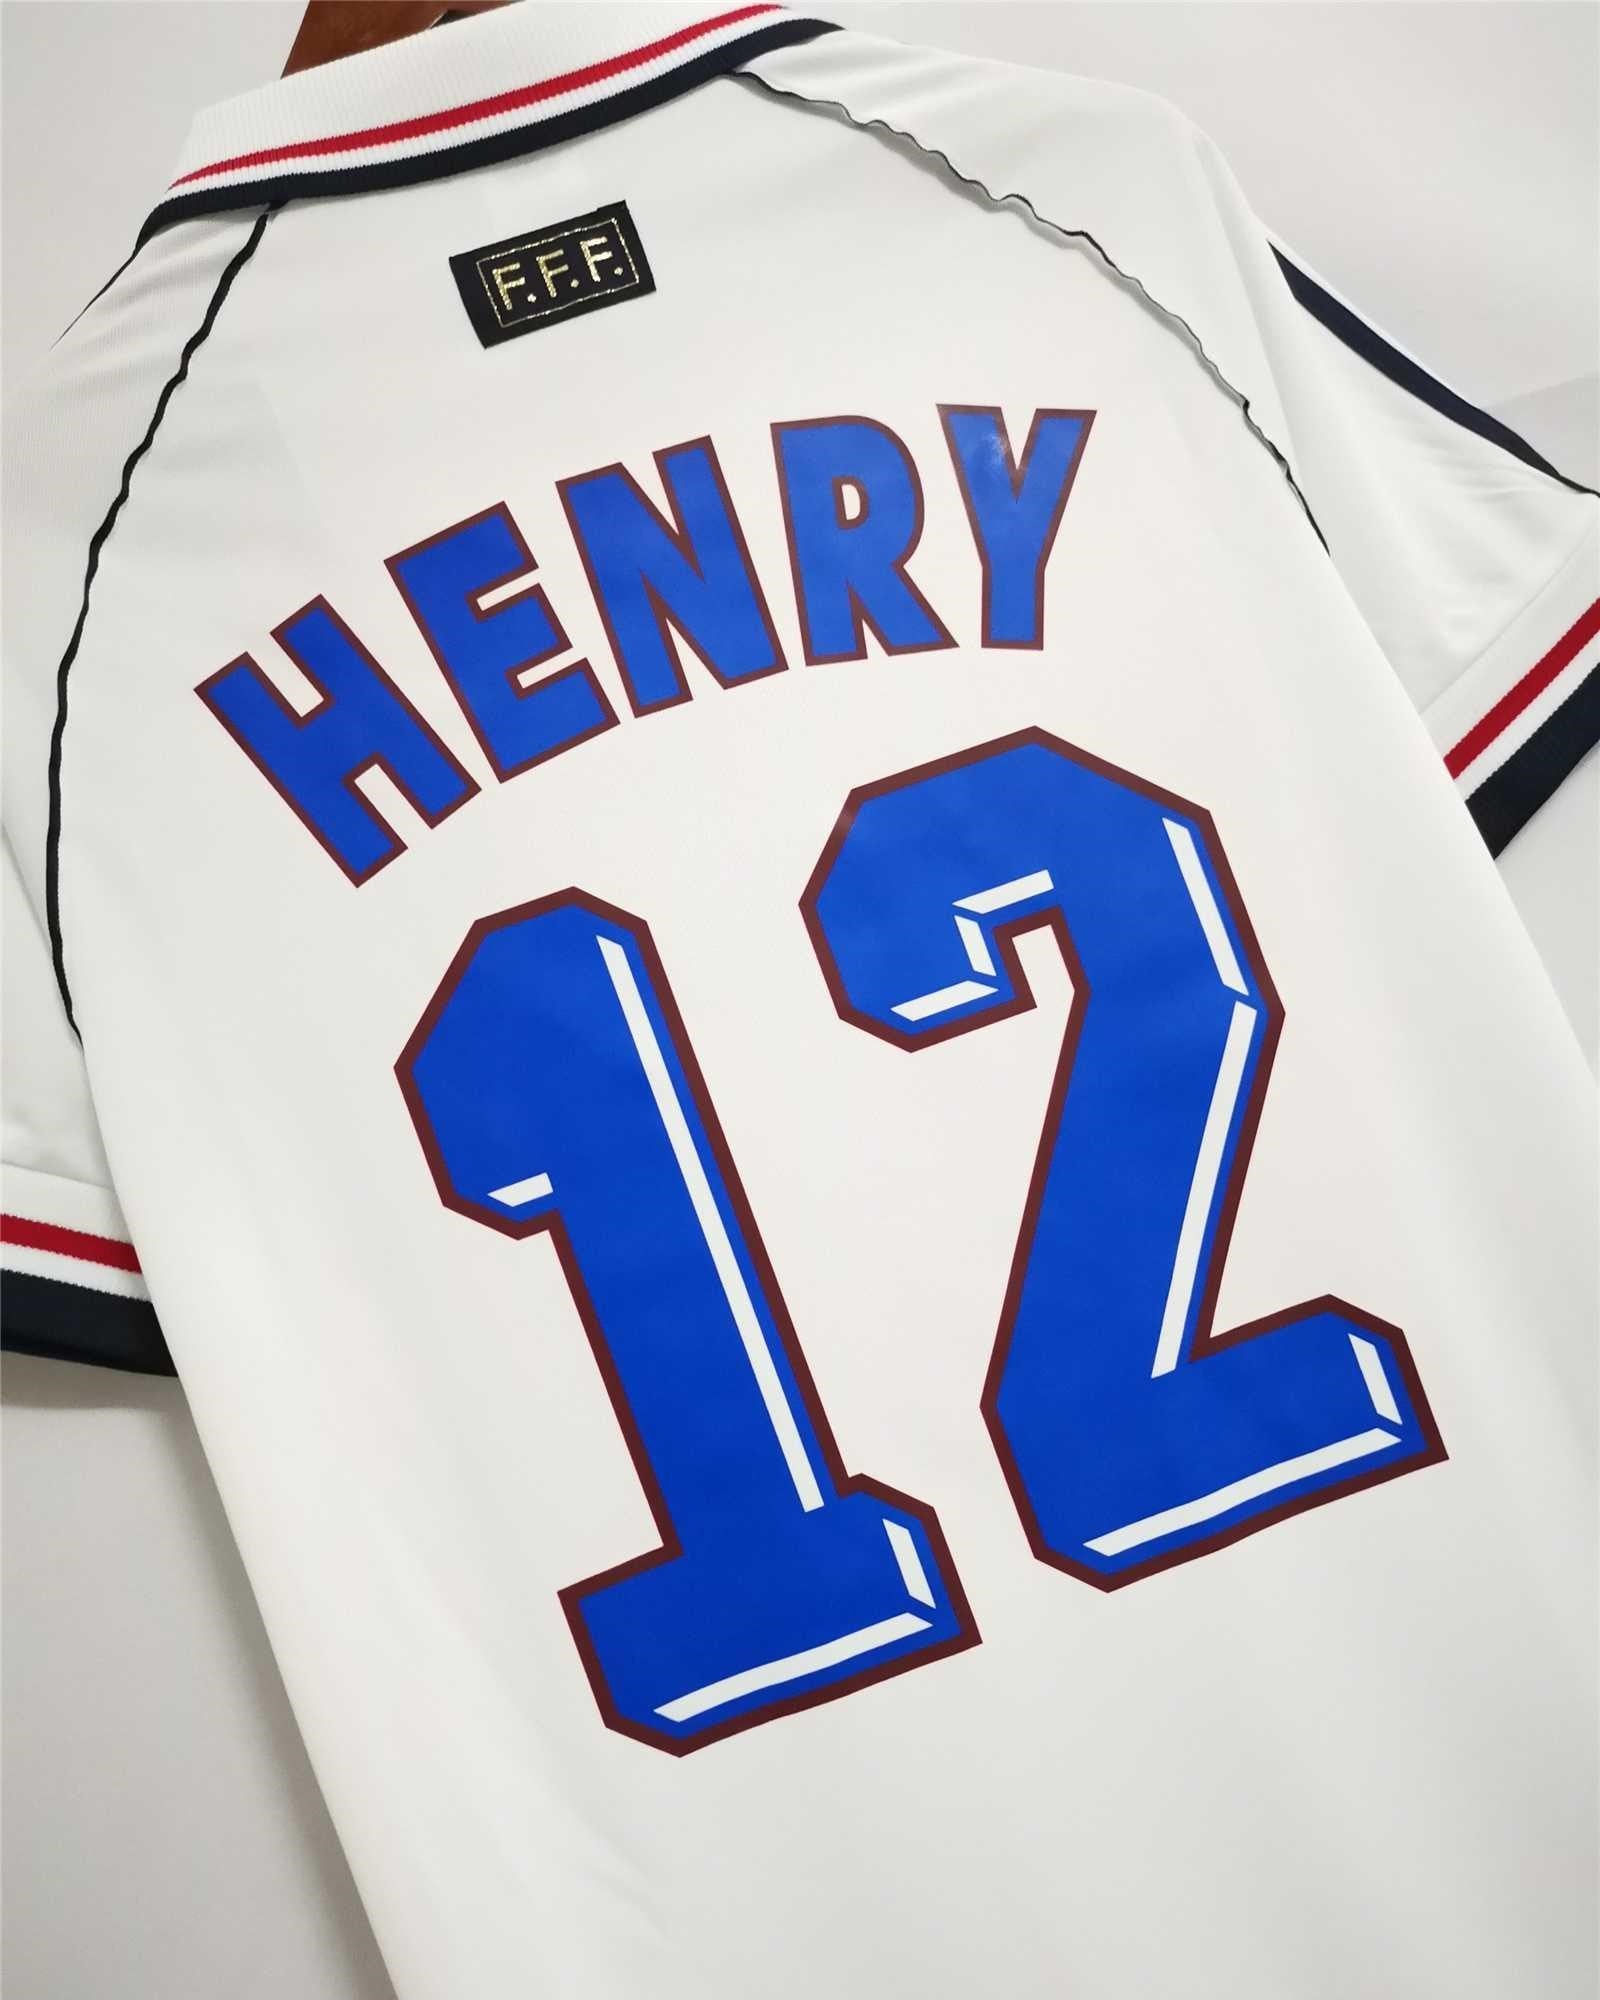 HENRY THIERRY 1998-99 (Fra)